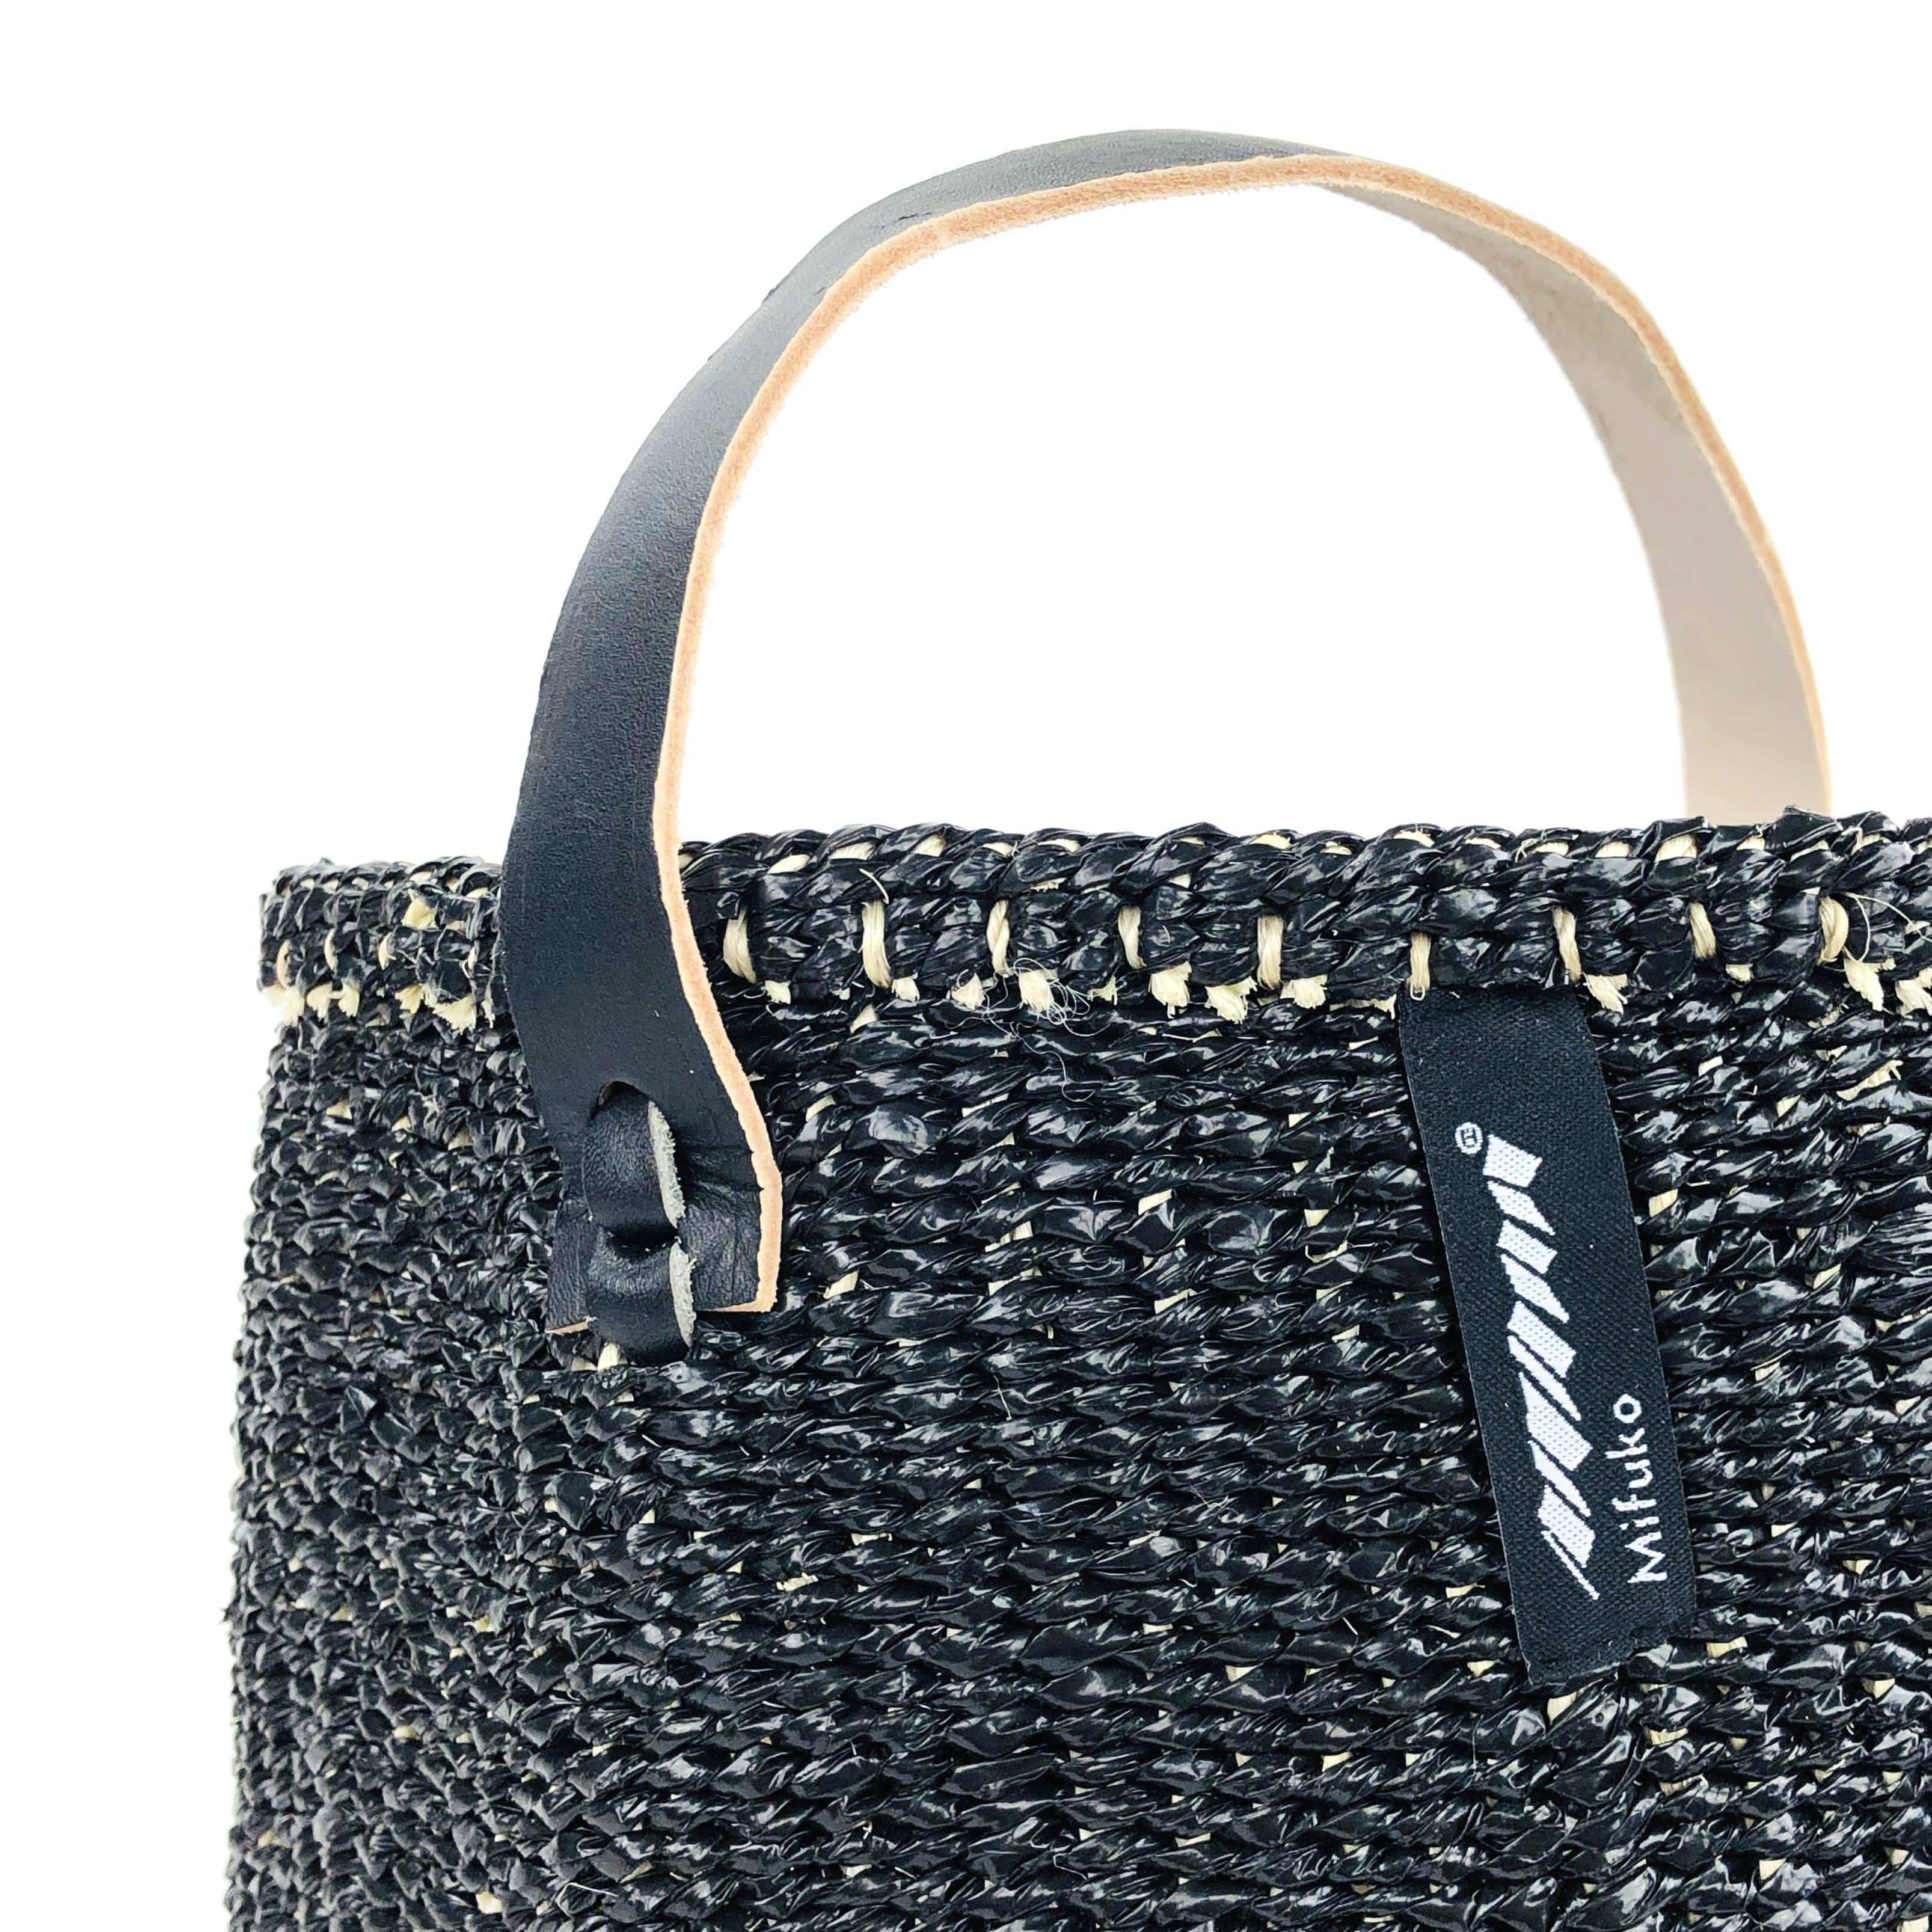 Mifuko Partly recycled plastic and sisal Small basket with short handle S Kiondo basket with handle | Black S